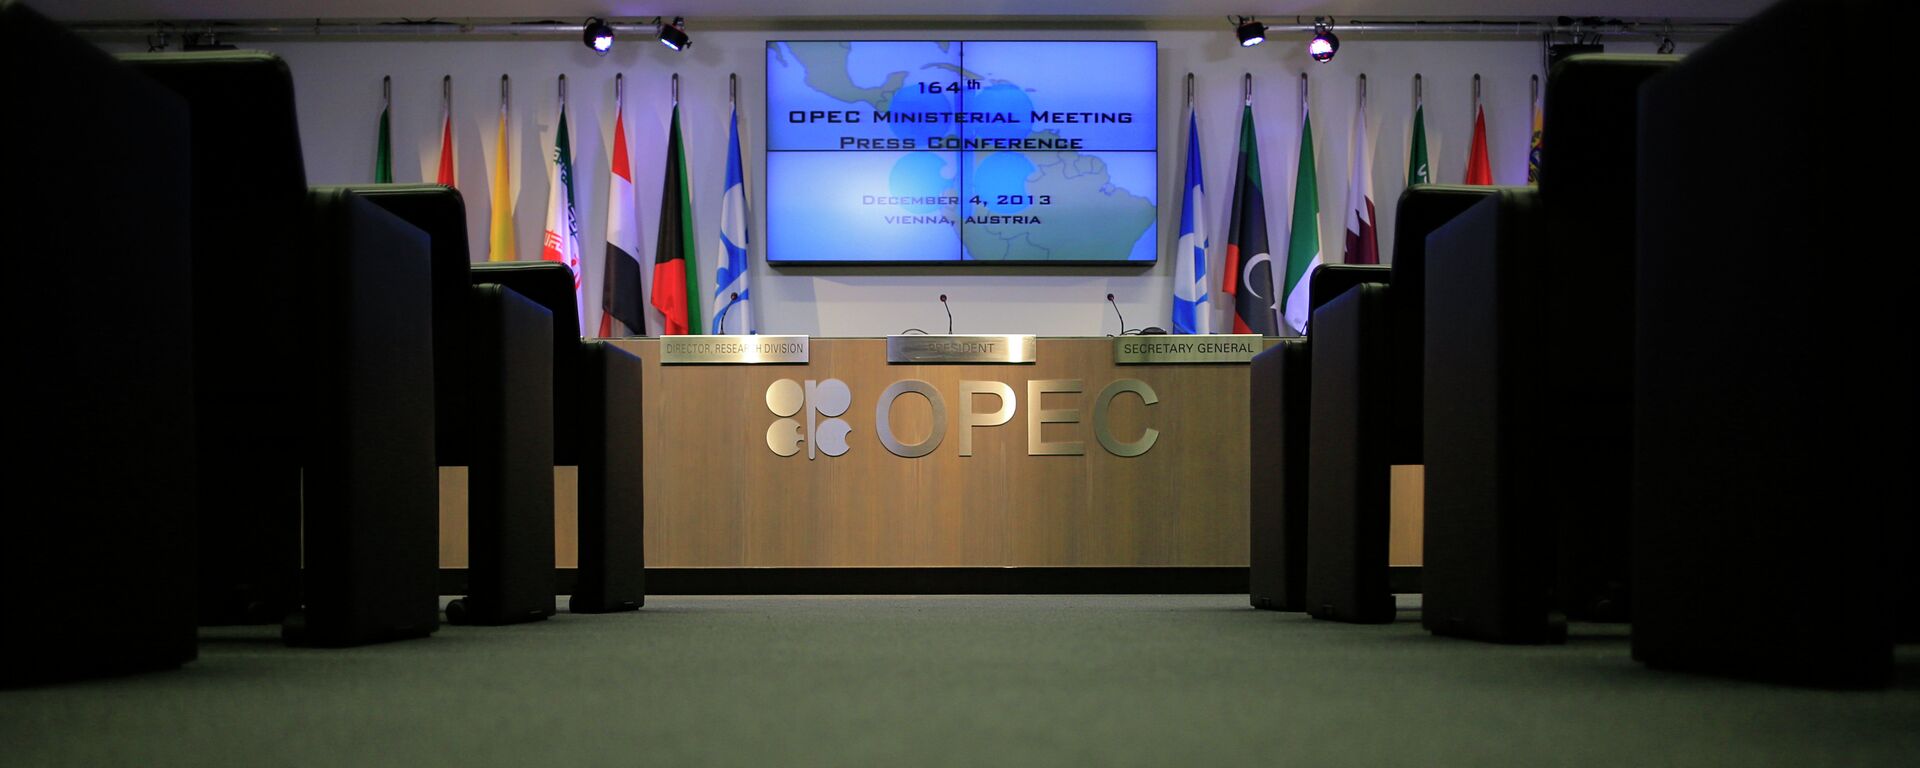 The press conference room of the OPEC (Organization of the Petroleum Exporting Countries) is seen at the organization's headquarter on the eve of the 164th OPEC meeting in Vienna, Austria on December 3, 2013 - سبوتنيك عربي, 1920, 02.06.2022